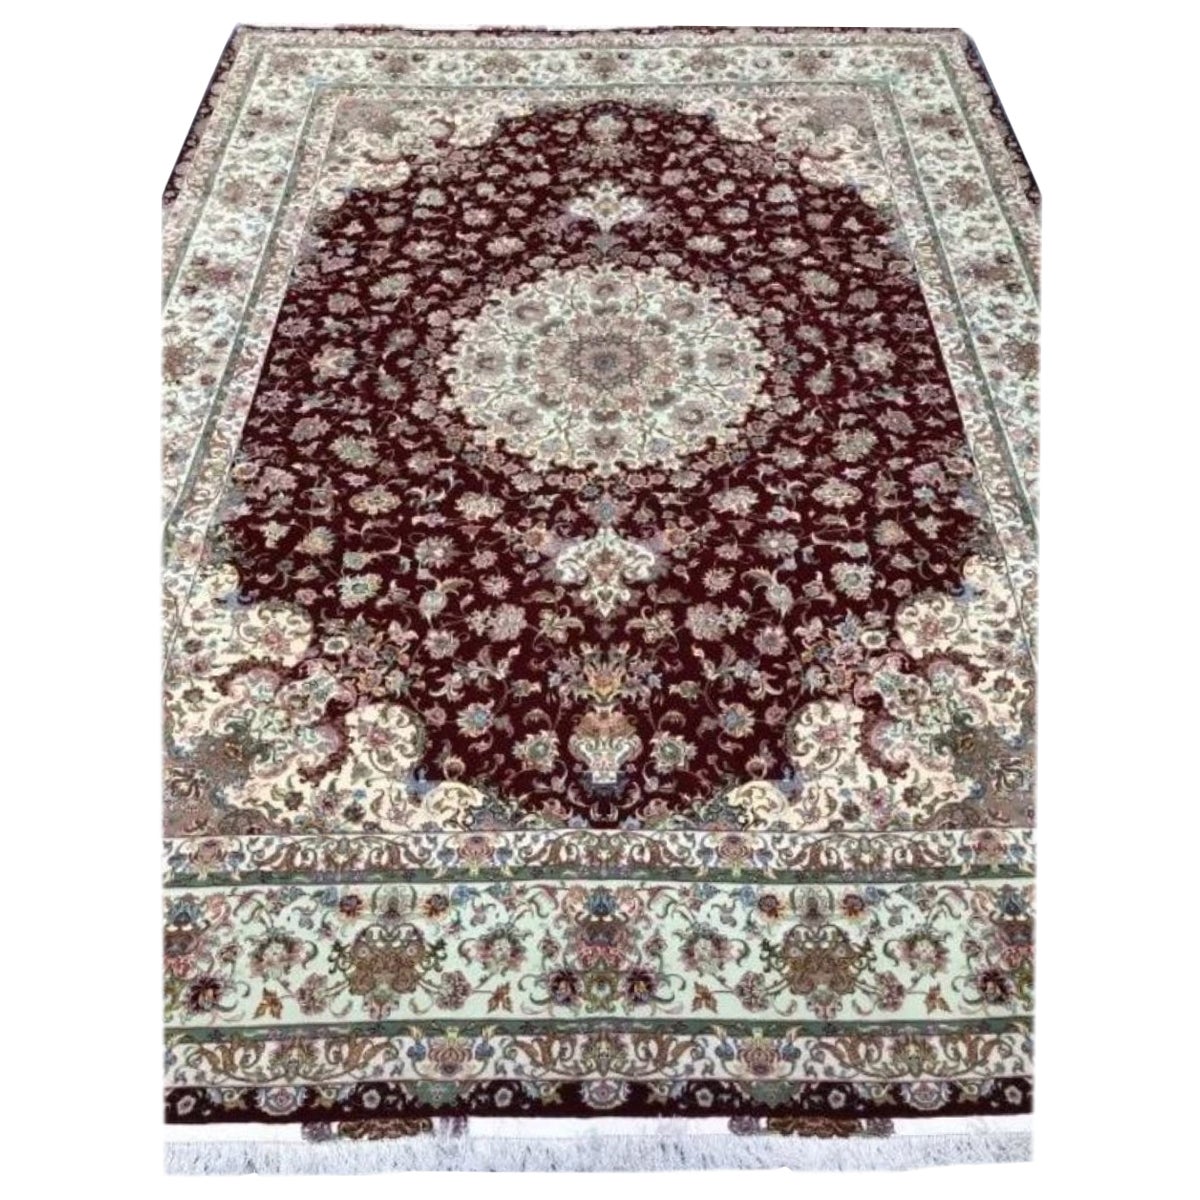 Very fine Persian Tabriz Silk & Wool Rug - 13.3' x 9.7' In Excellent Condition For Sale In Newmanstown, PA